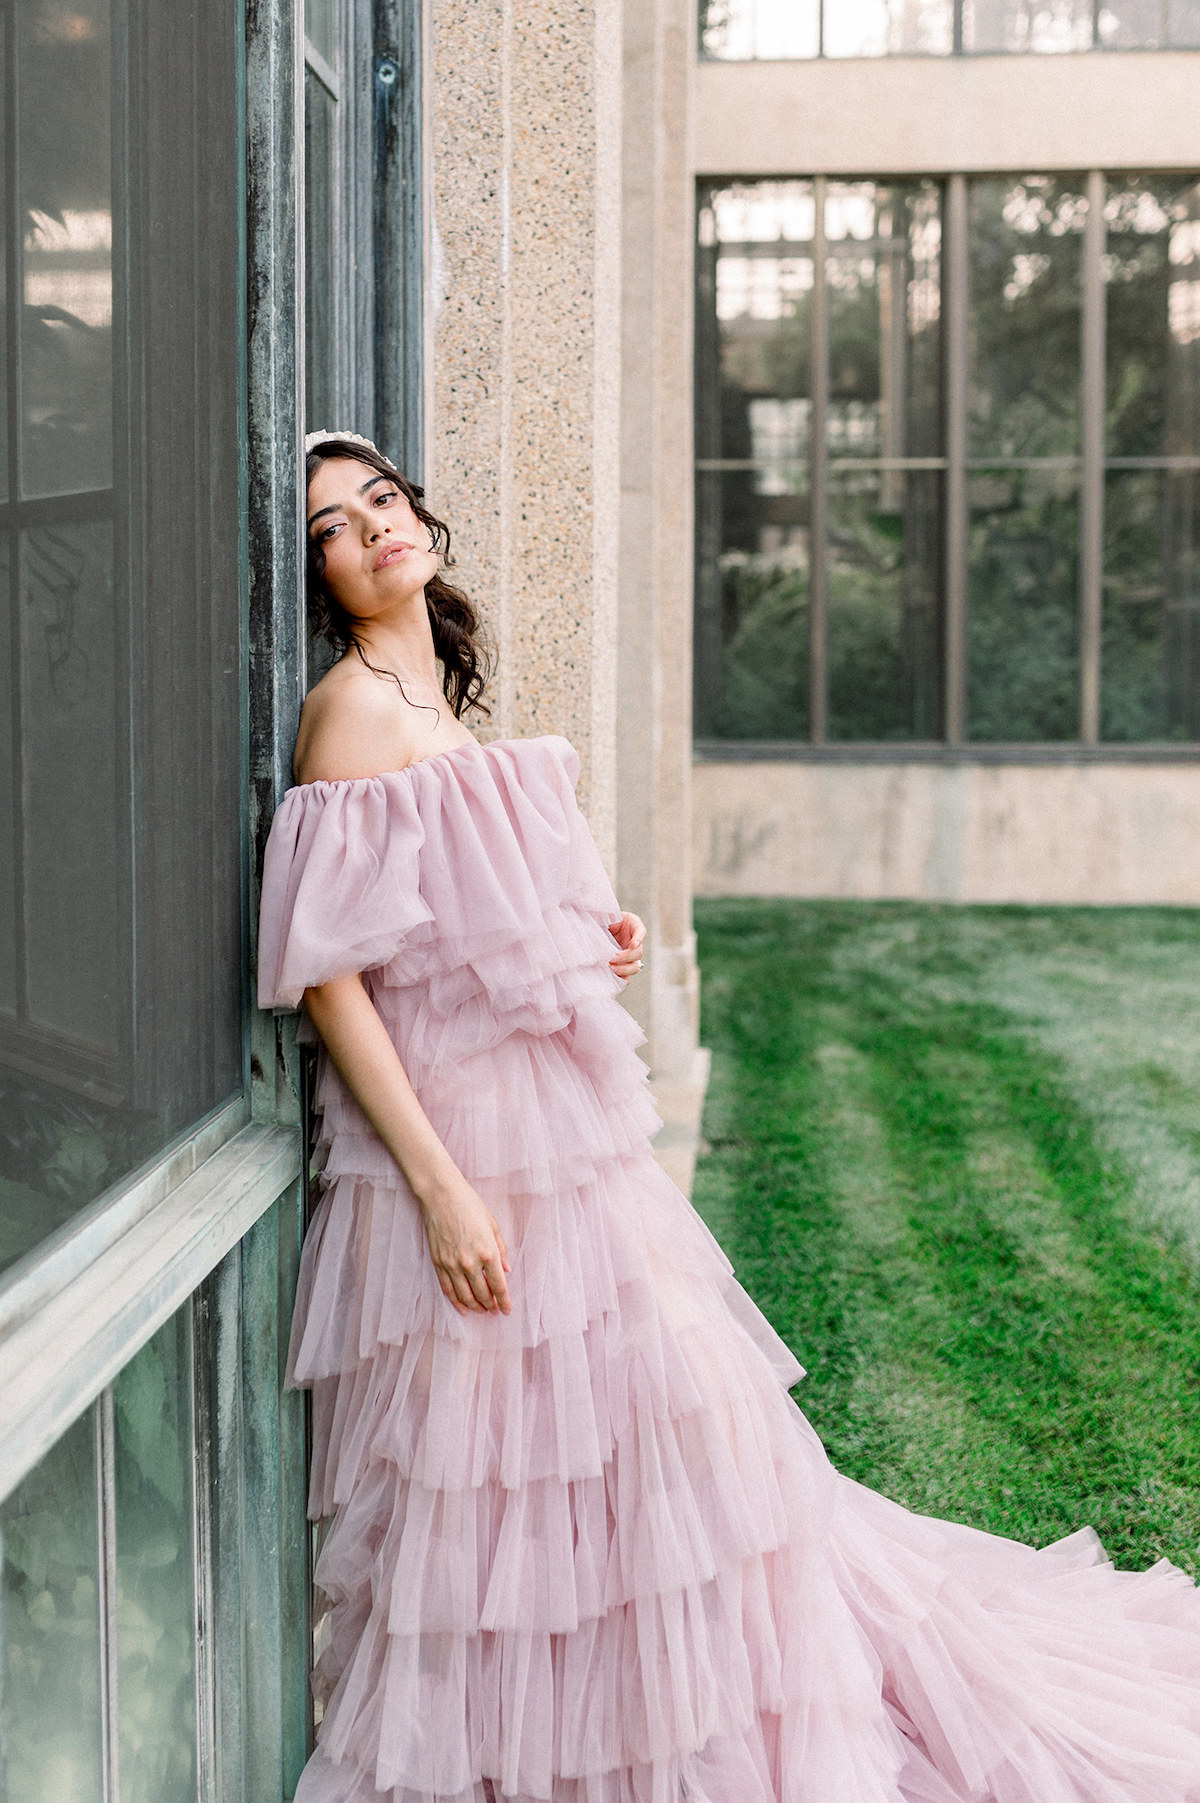 Karla's poised and dramatic pose in the couture gown adds a touch of runway glamour to the serene beauty of Longwood Gardens.